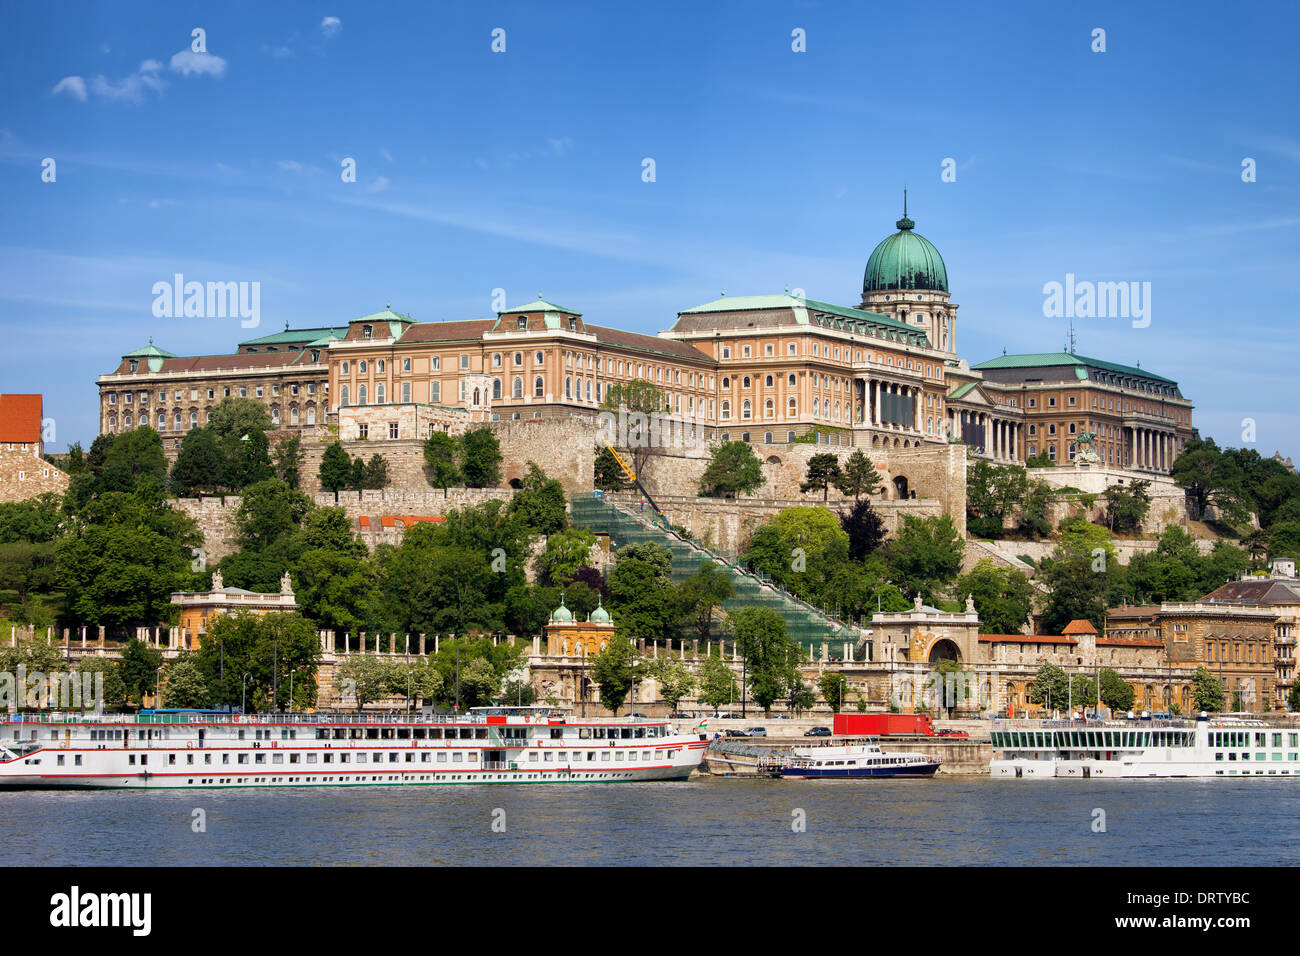 Buda Castle (Royal Palace) and passenger boats on the Danube River in Budapest, Hungary. Stock Photo